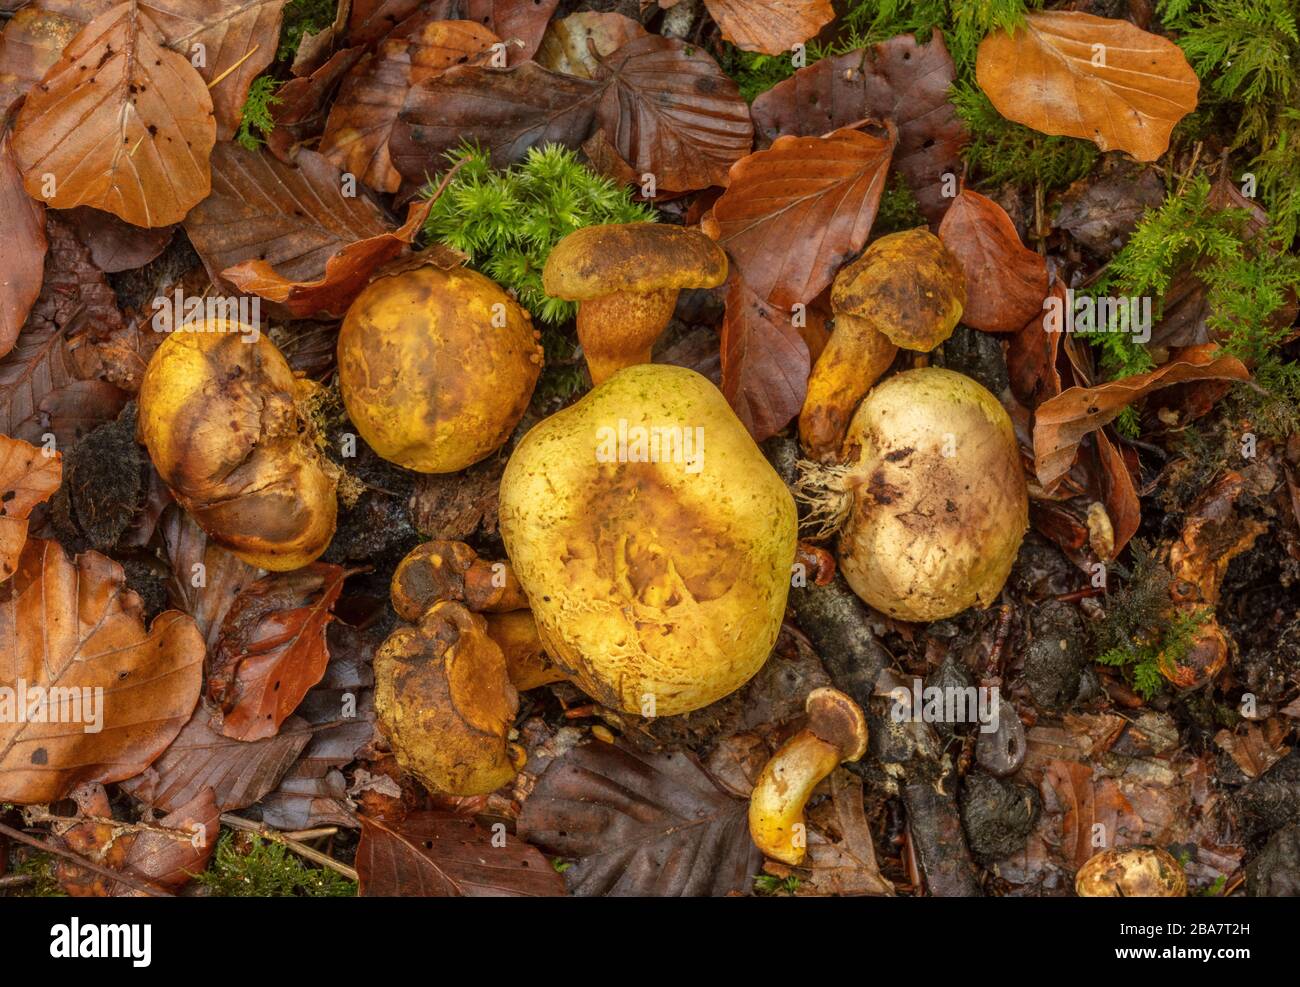 Parasitic bolete, Pseudoboletus parasiticus, growing on Common Earthball, Scleroderma citrinum, in mossy beech woodland, New Forest. Stock Photo